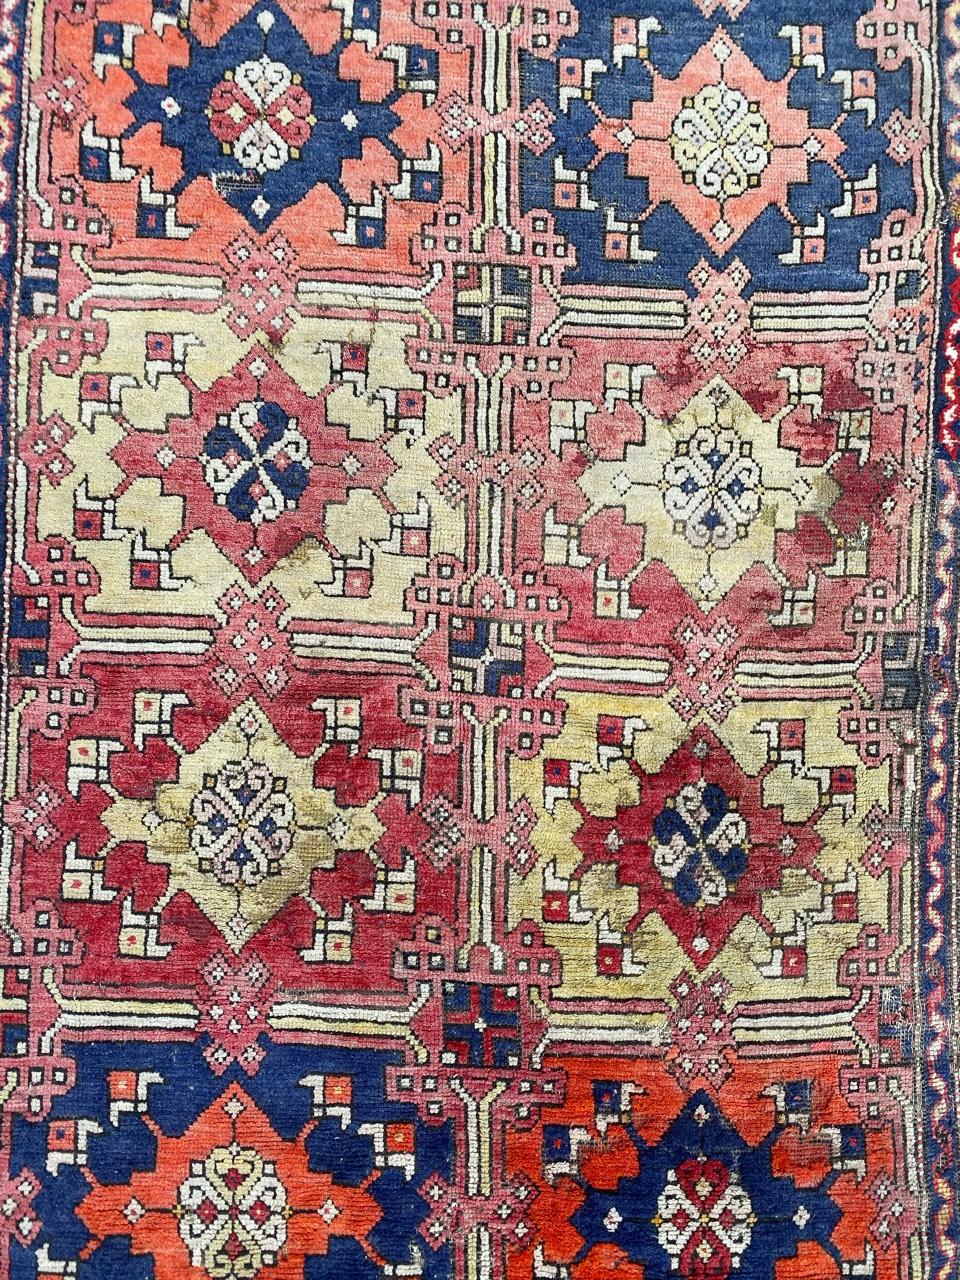 Beautiful Turkish rug with nice decorative design and beautiful colors with red, yellow, blue, orange and pink, entirely hand knotted with wool velvet on cotton foundation.

✨✨✨
